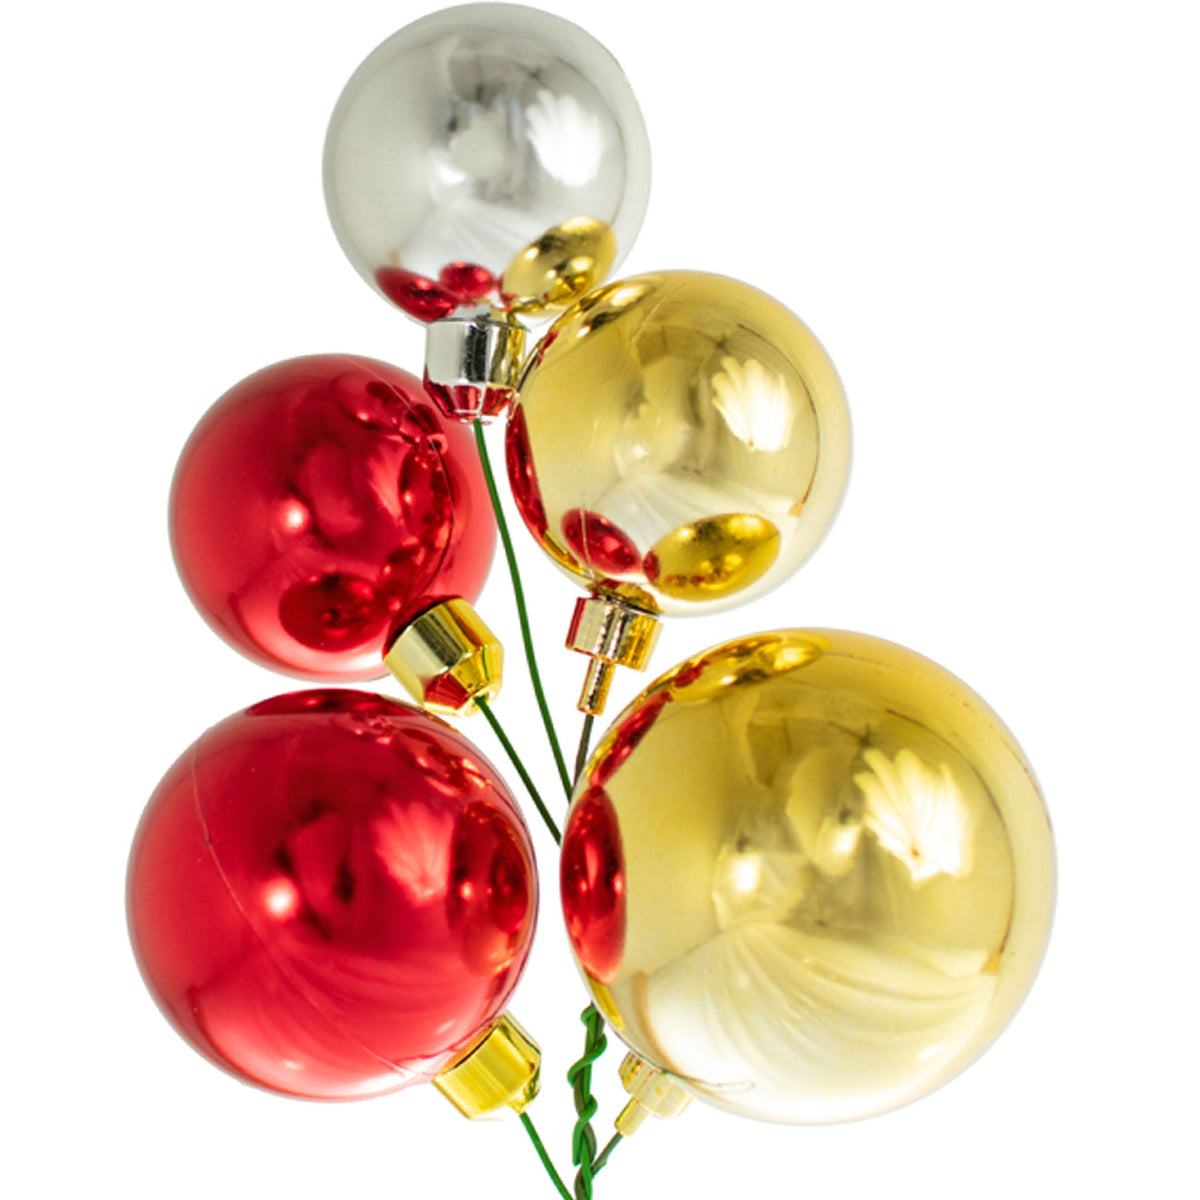 The Santa Rosa Ball Ornament Cluster comes with Shiny Red, Shiny Gold, and Shiny Silver Ball Ornaments